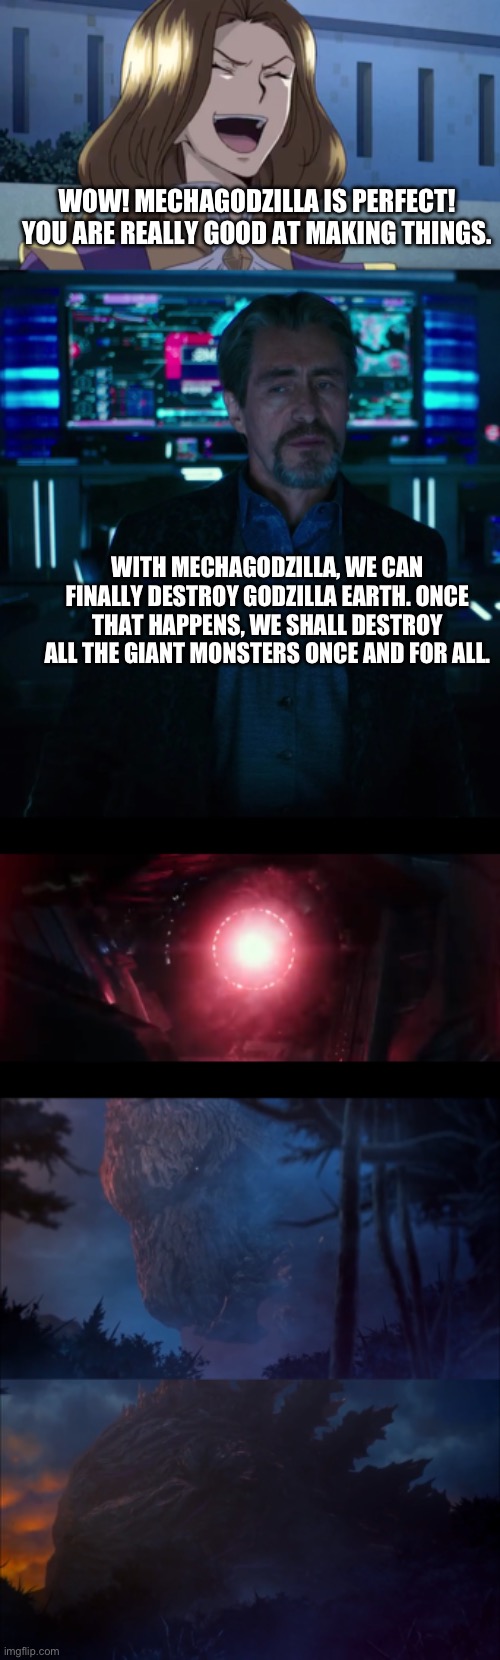 Godzilla Earth senses Mechagodzilla | WOW! MECHAGODZILLA IS PERFECT! YOU ARE REALLY GOOD AT MAKING THINGS. WITH MECHAGODZILLA, WE CAN FINALLY DESTROY GODZILLA EARTH. ONCE THAT HAPPENS, WE SHALL DESTROY ALL THE GIANT MONSTERS ONCE AND FOR ALL. | image tagged in crossover | made w/ Imgflip meme maker